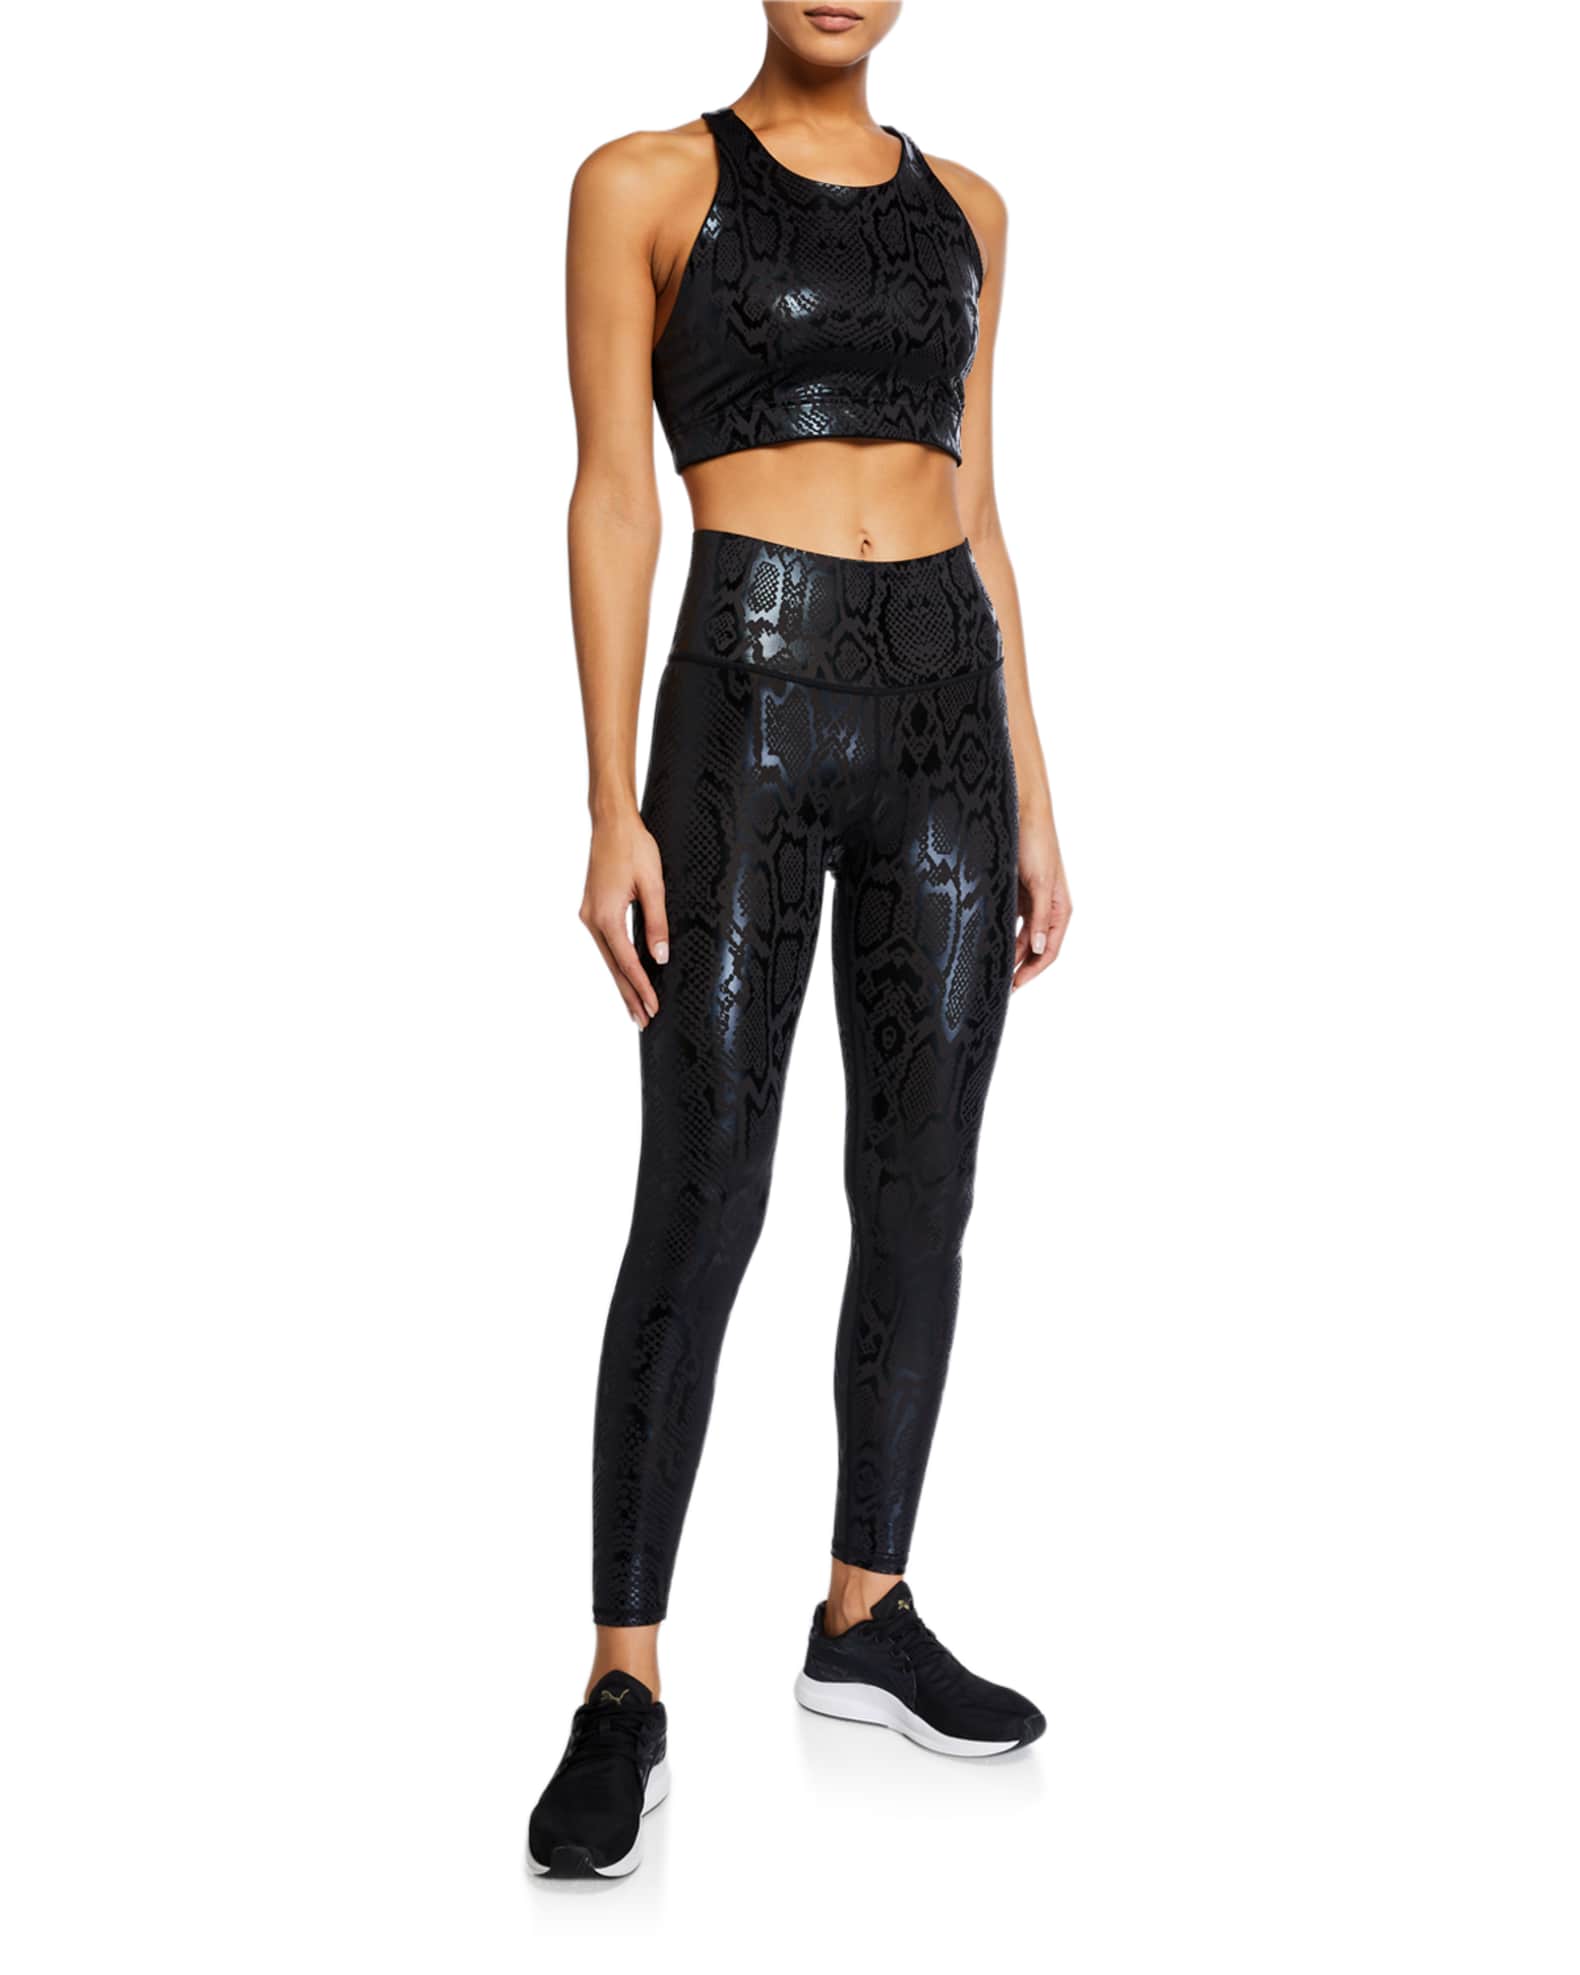 calzedonia, Pants & Jumpsuits, Calzedonia Snake Print Total Shaper Leather  Effect High Waisted Leggings